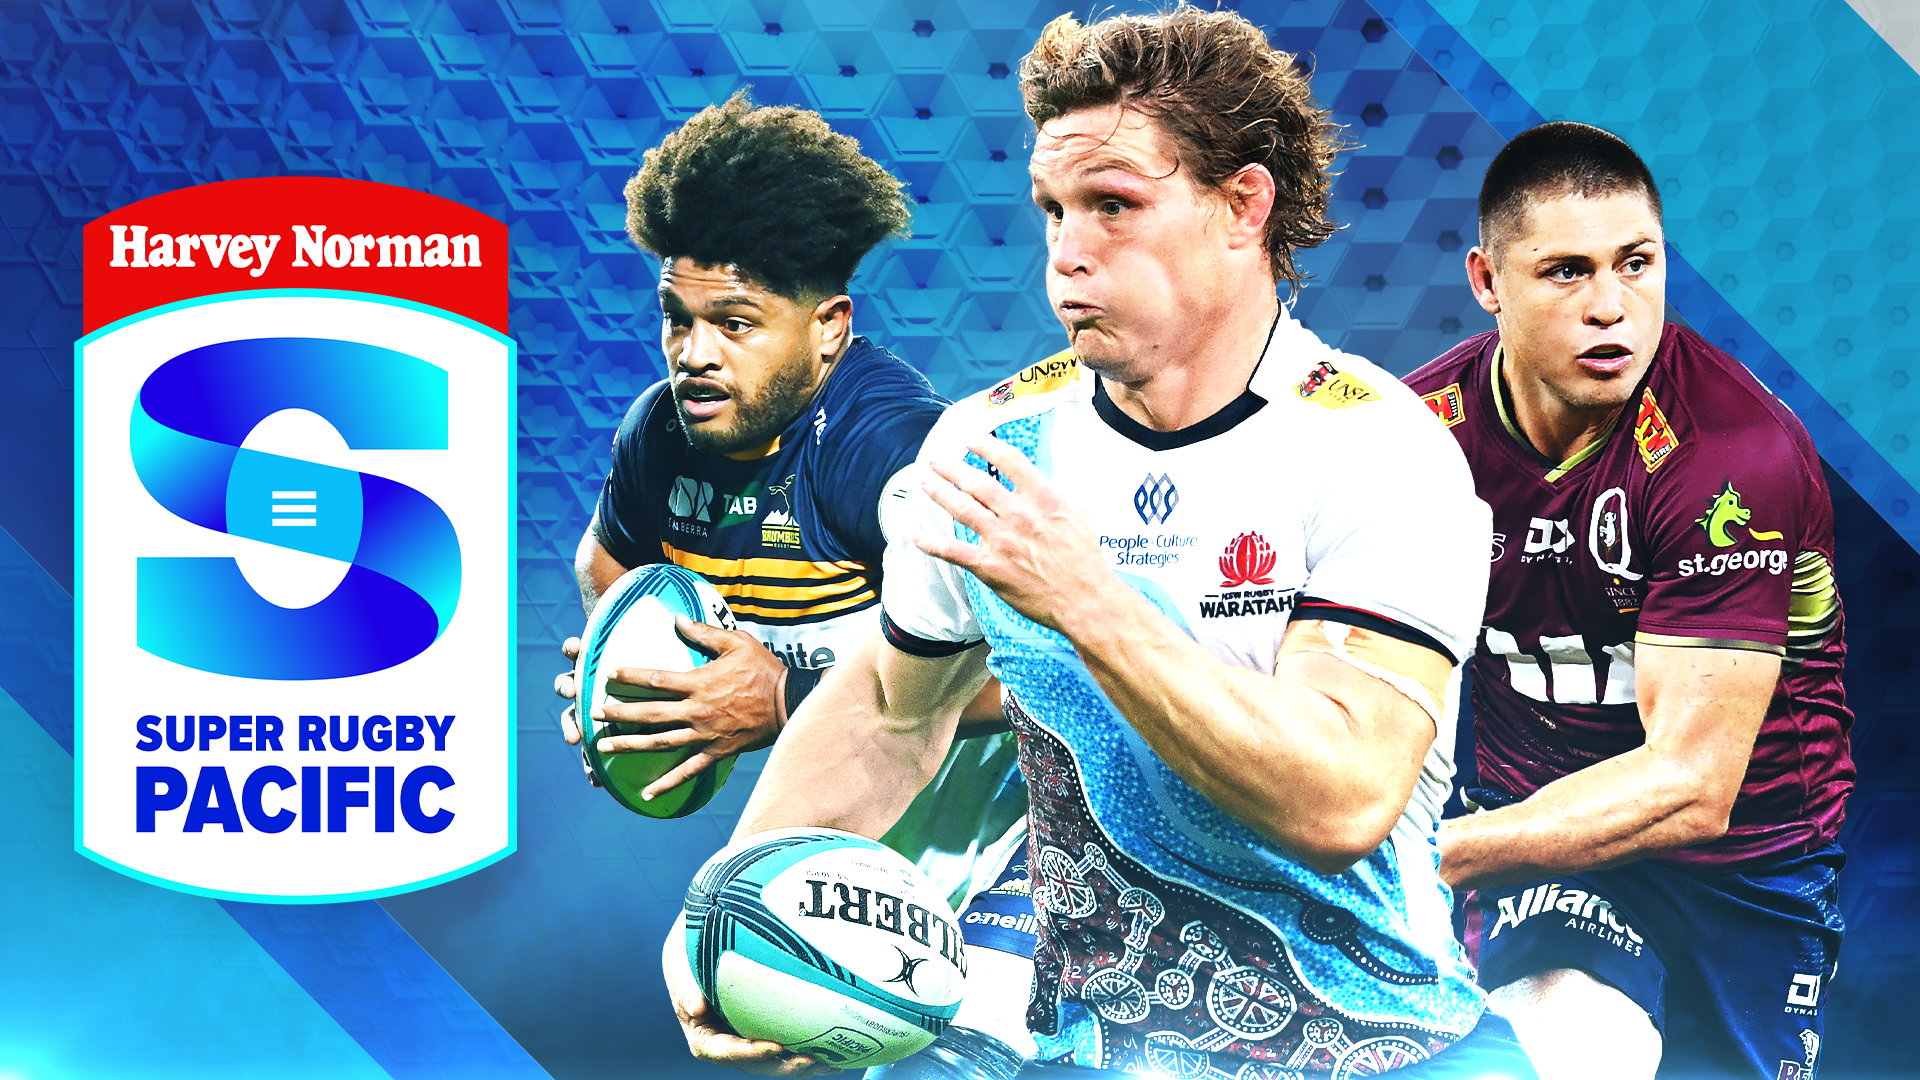 Watch Super Rugby live or on-demand Freeview Australia